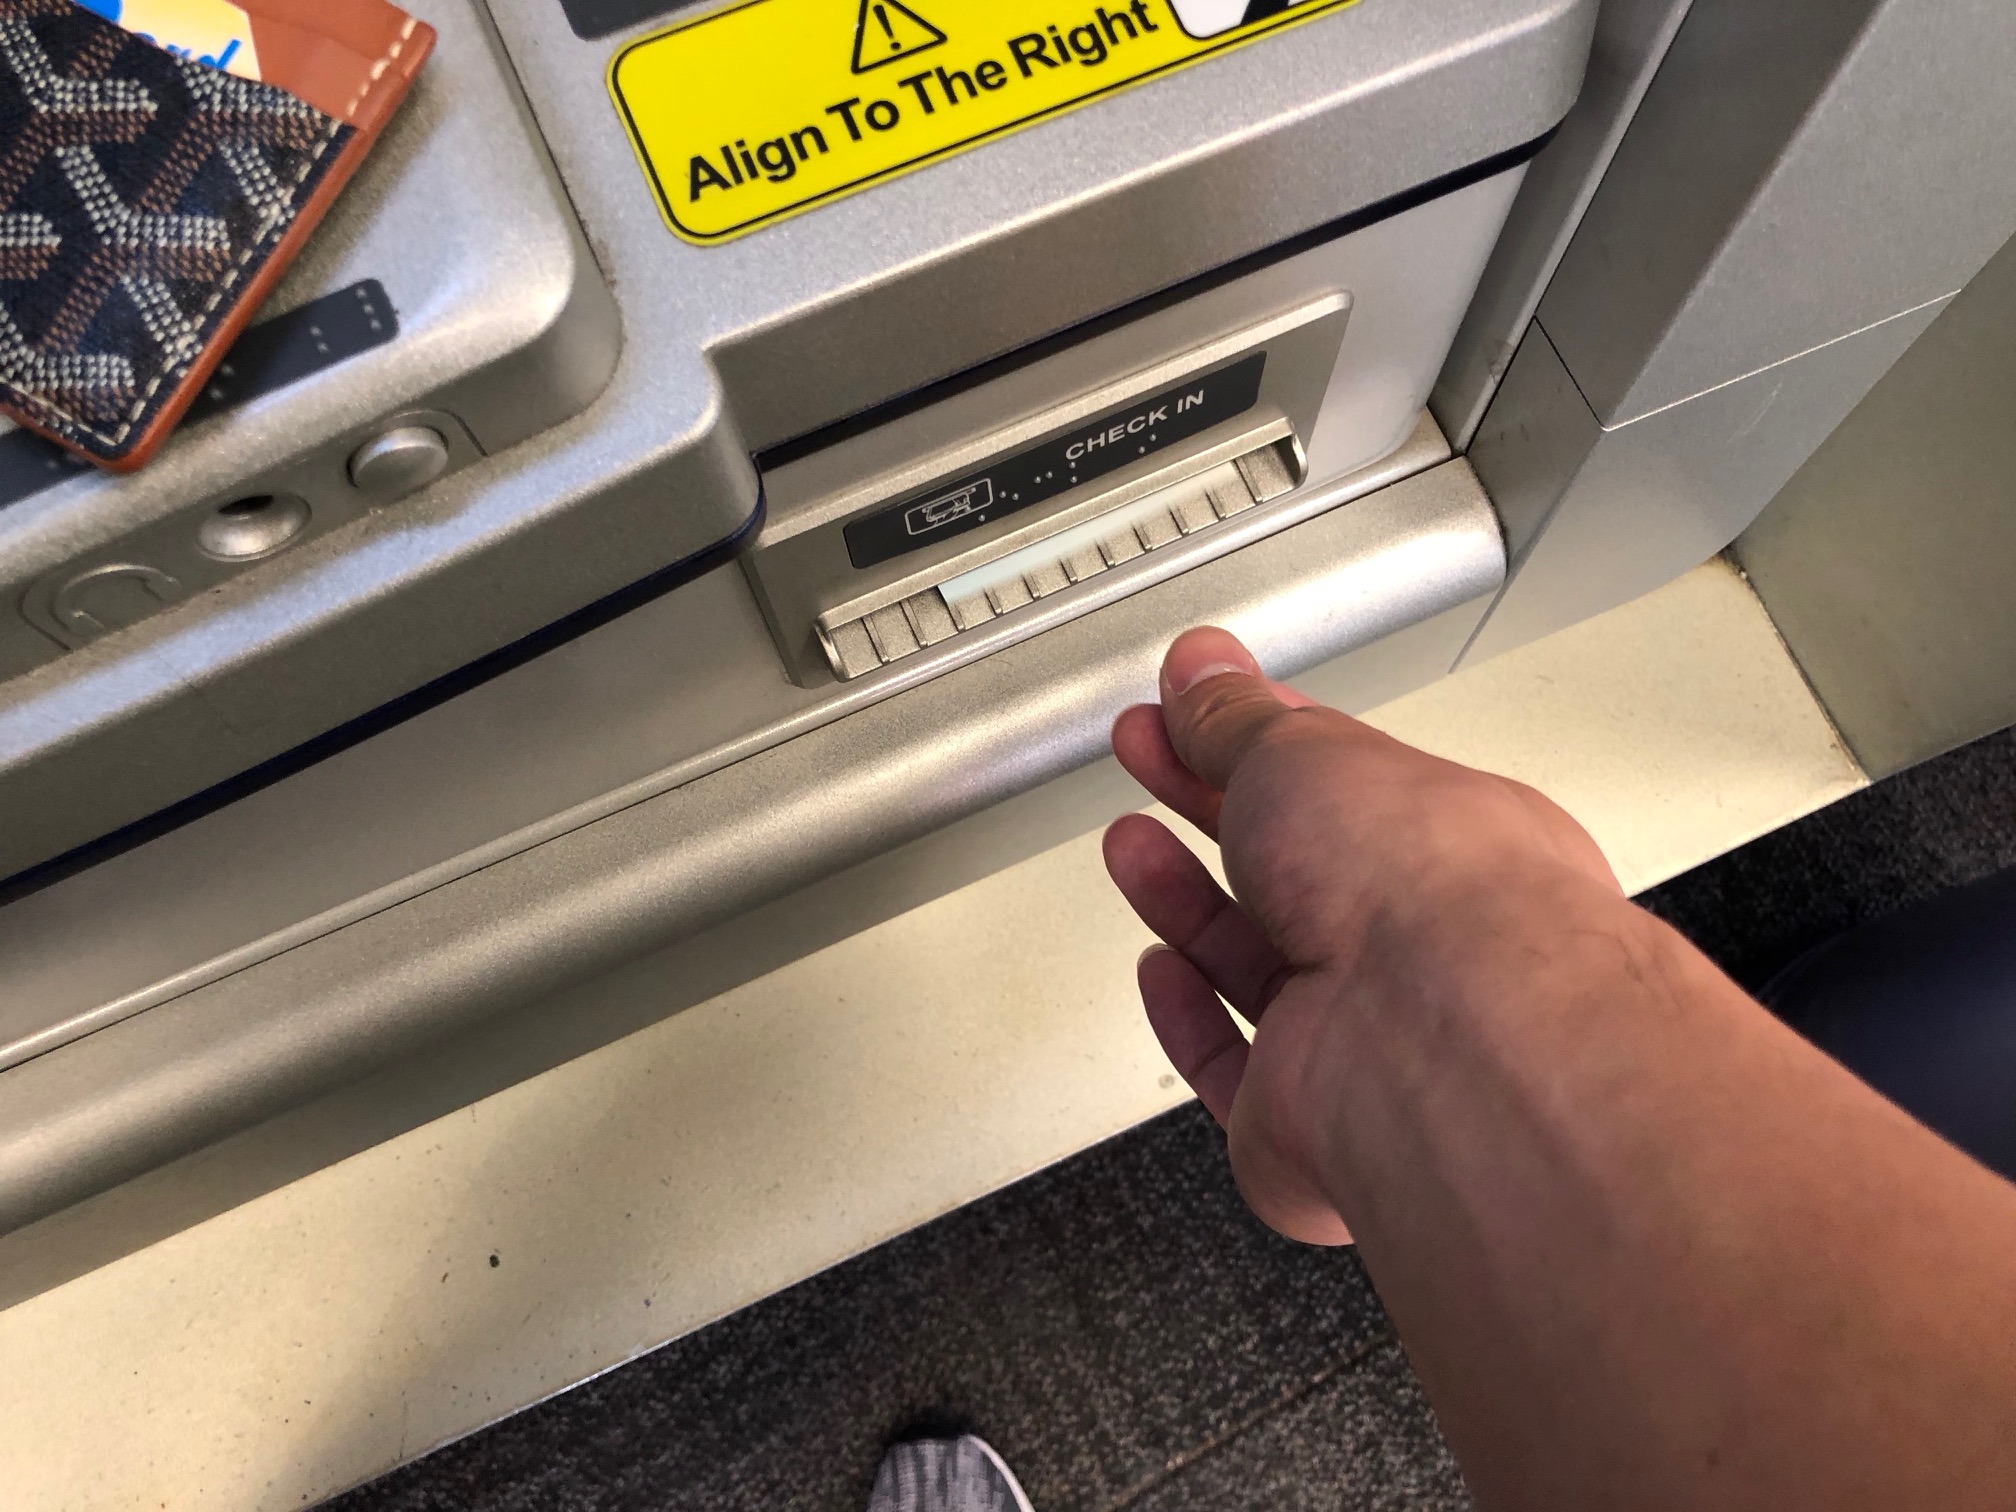 how do i deposit a check at an atm